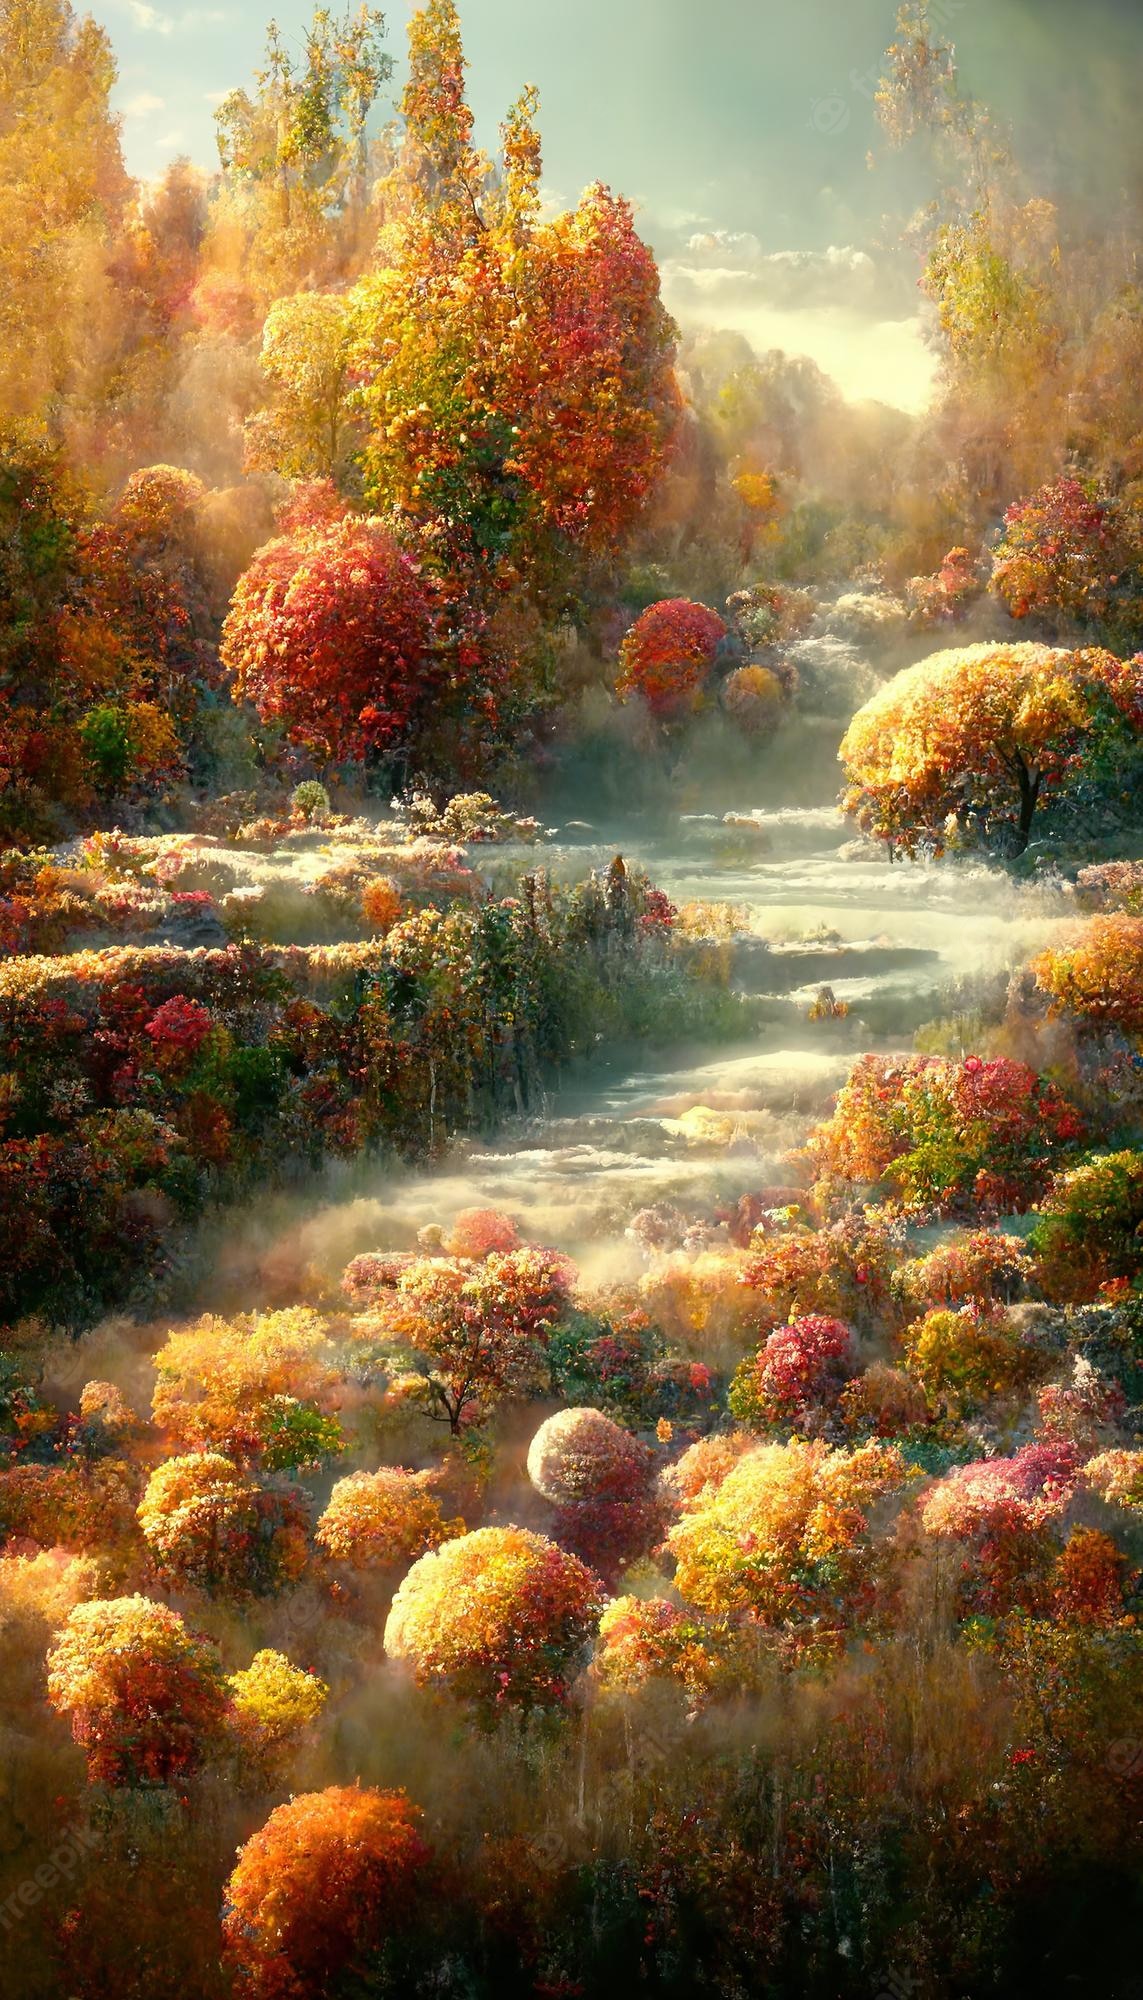 Autumn leaves panoramic Image. Free Vectors, & PSD